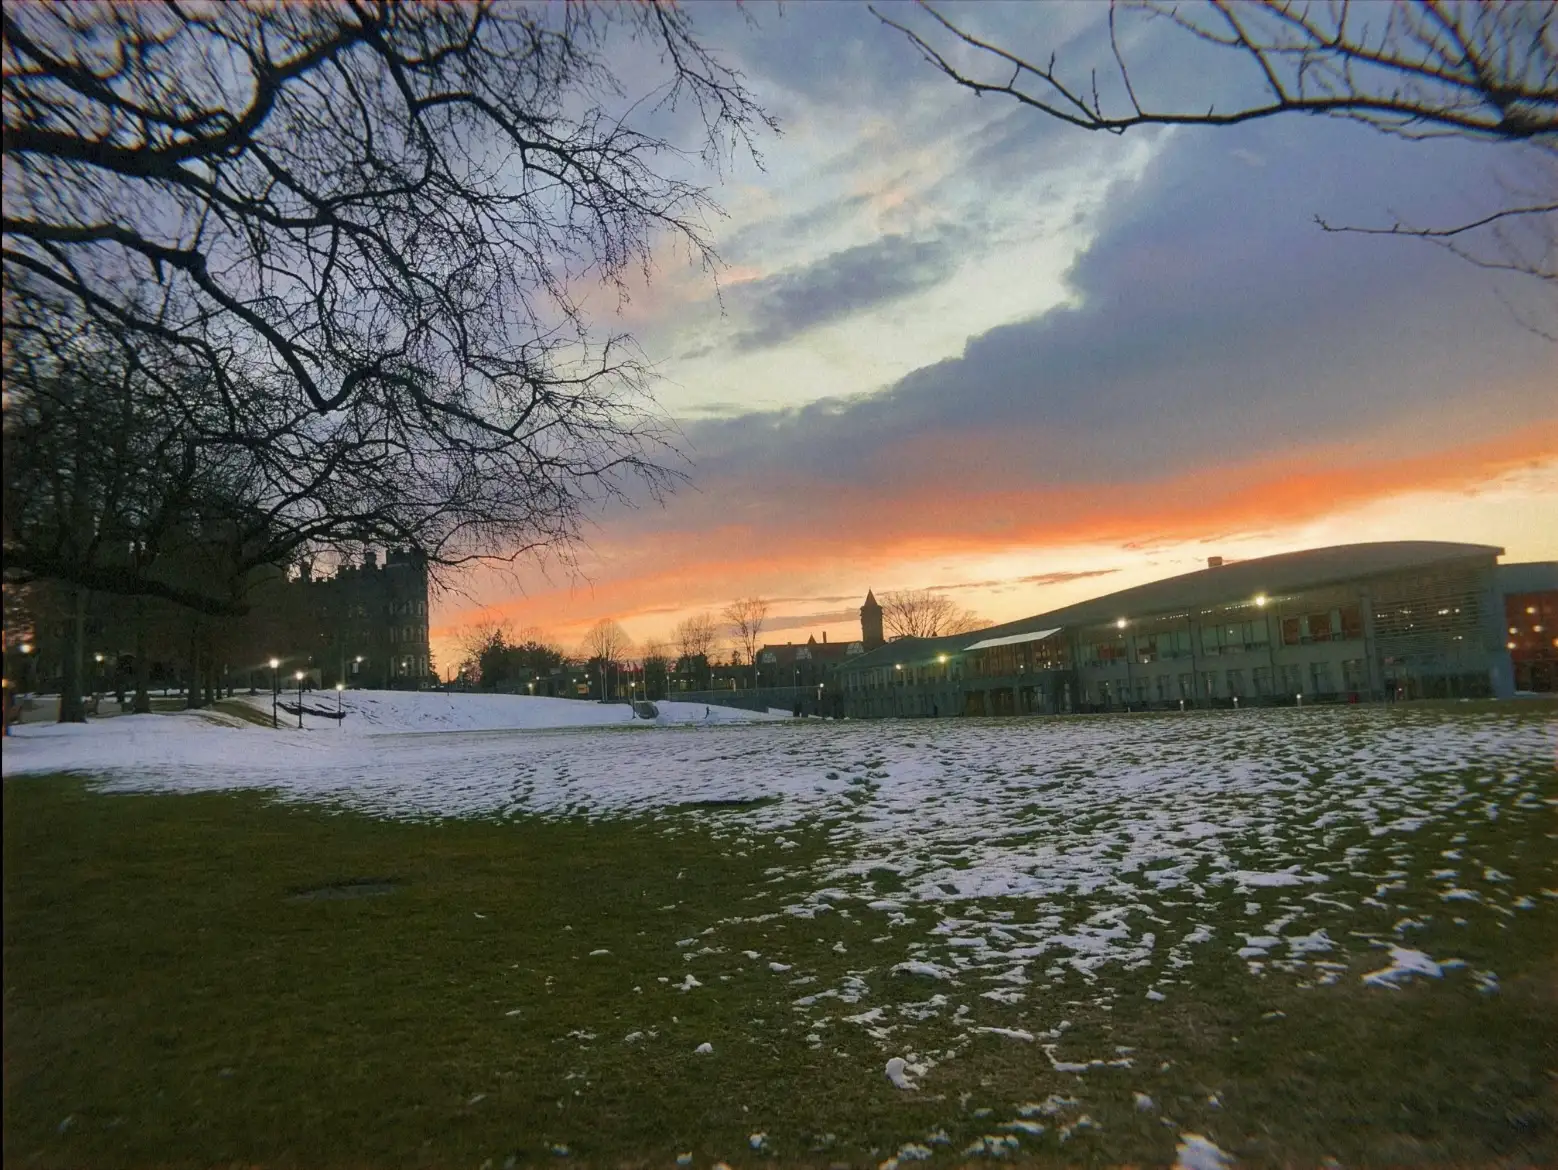 Haber Green with some snow and a sunset.